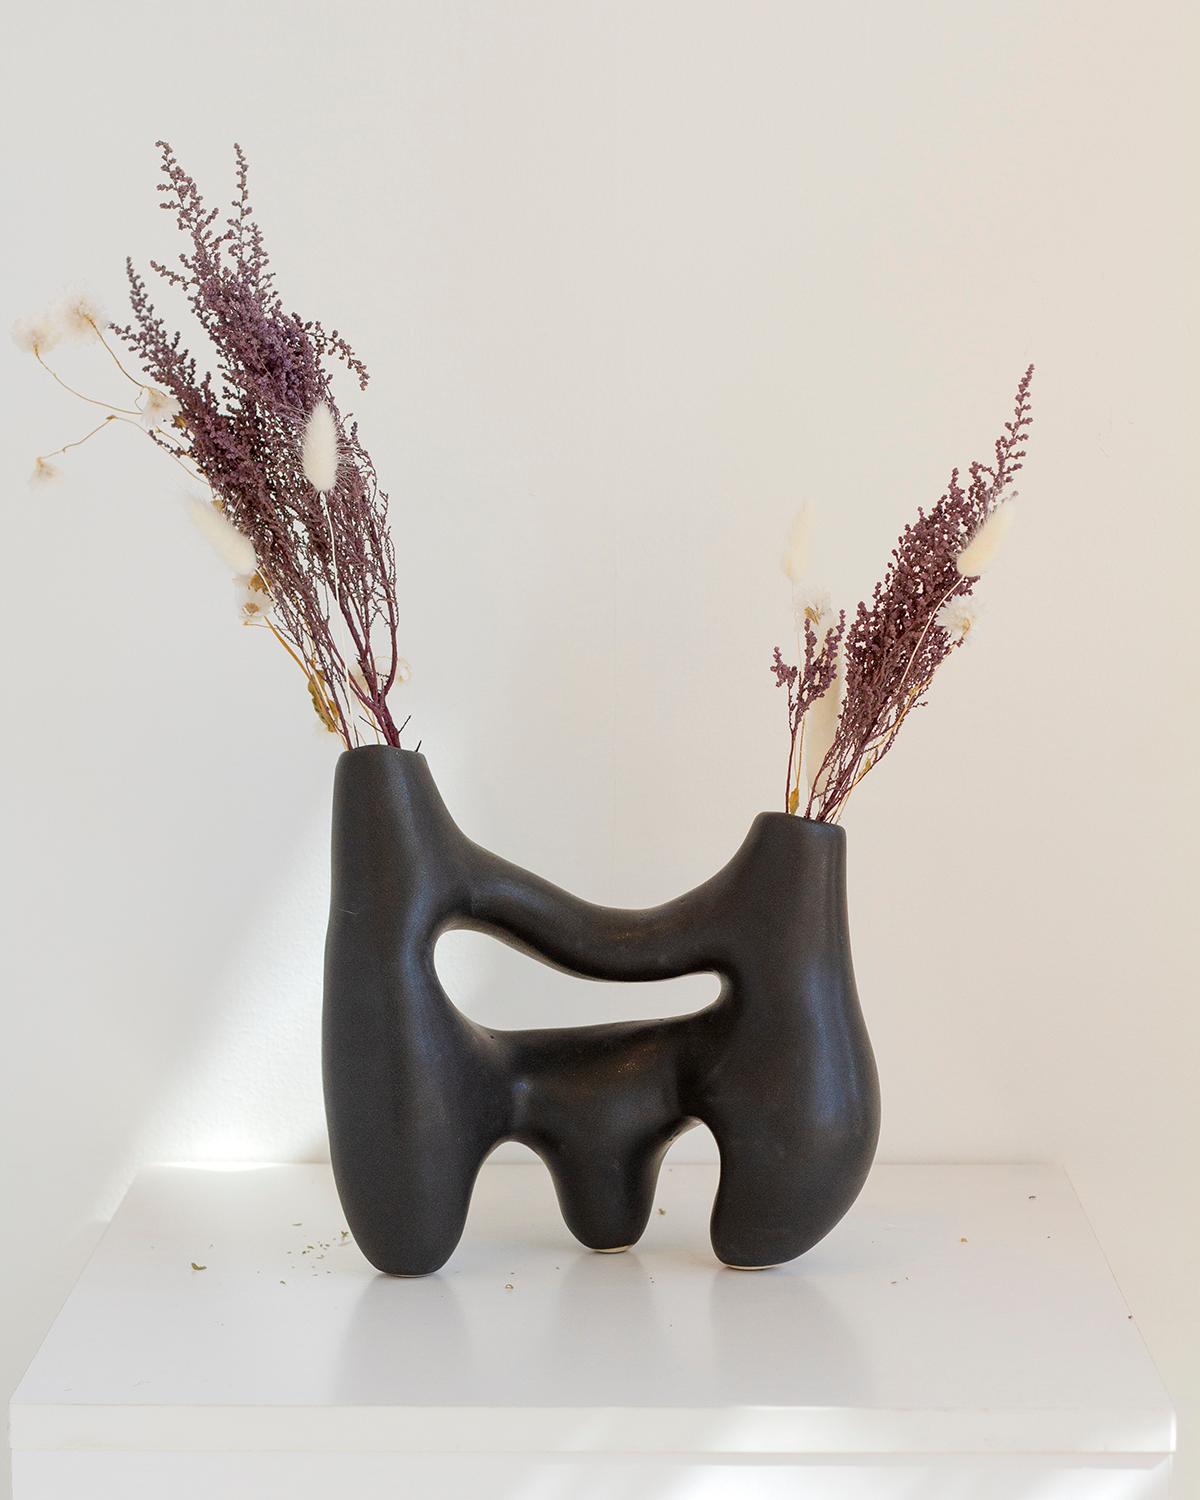 This unique handmade clay vase is a perfect holiday gift. With its sculptural, minimalist design and charcoal black color, it adds a touch of rustic quiet luxury to any room. Each piece is handmade and one-of-a-kind, making it an excellent addition